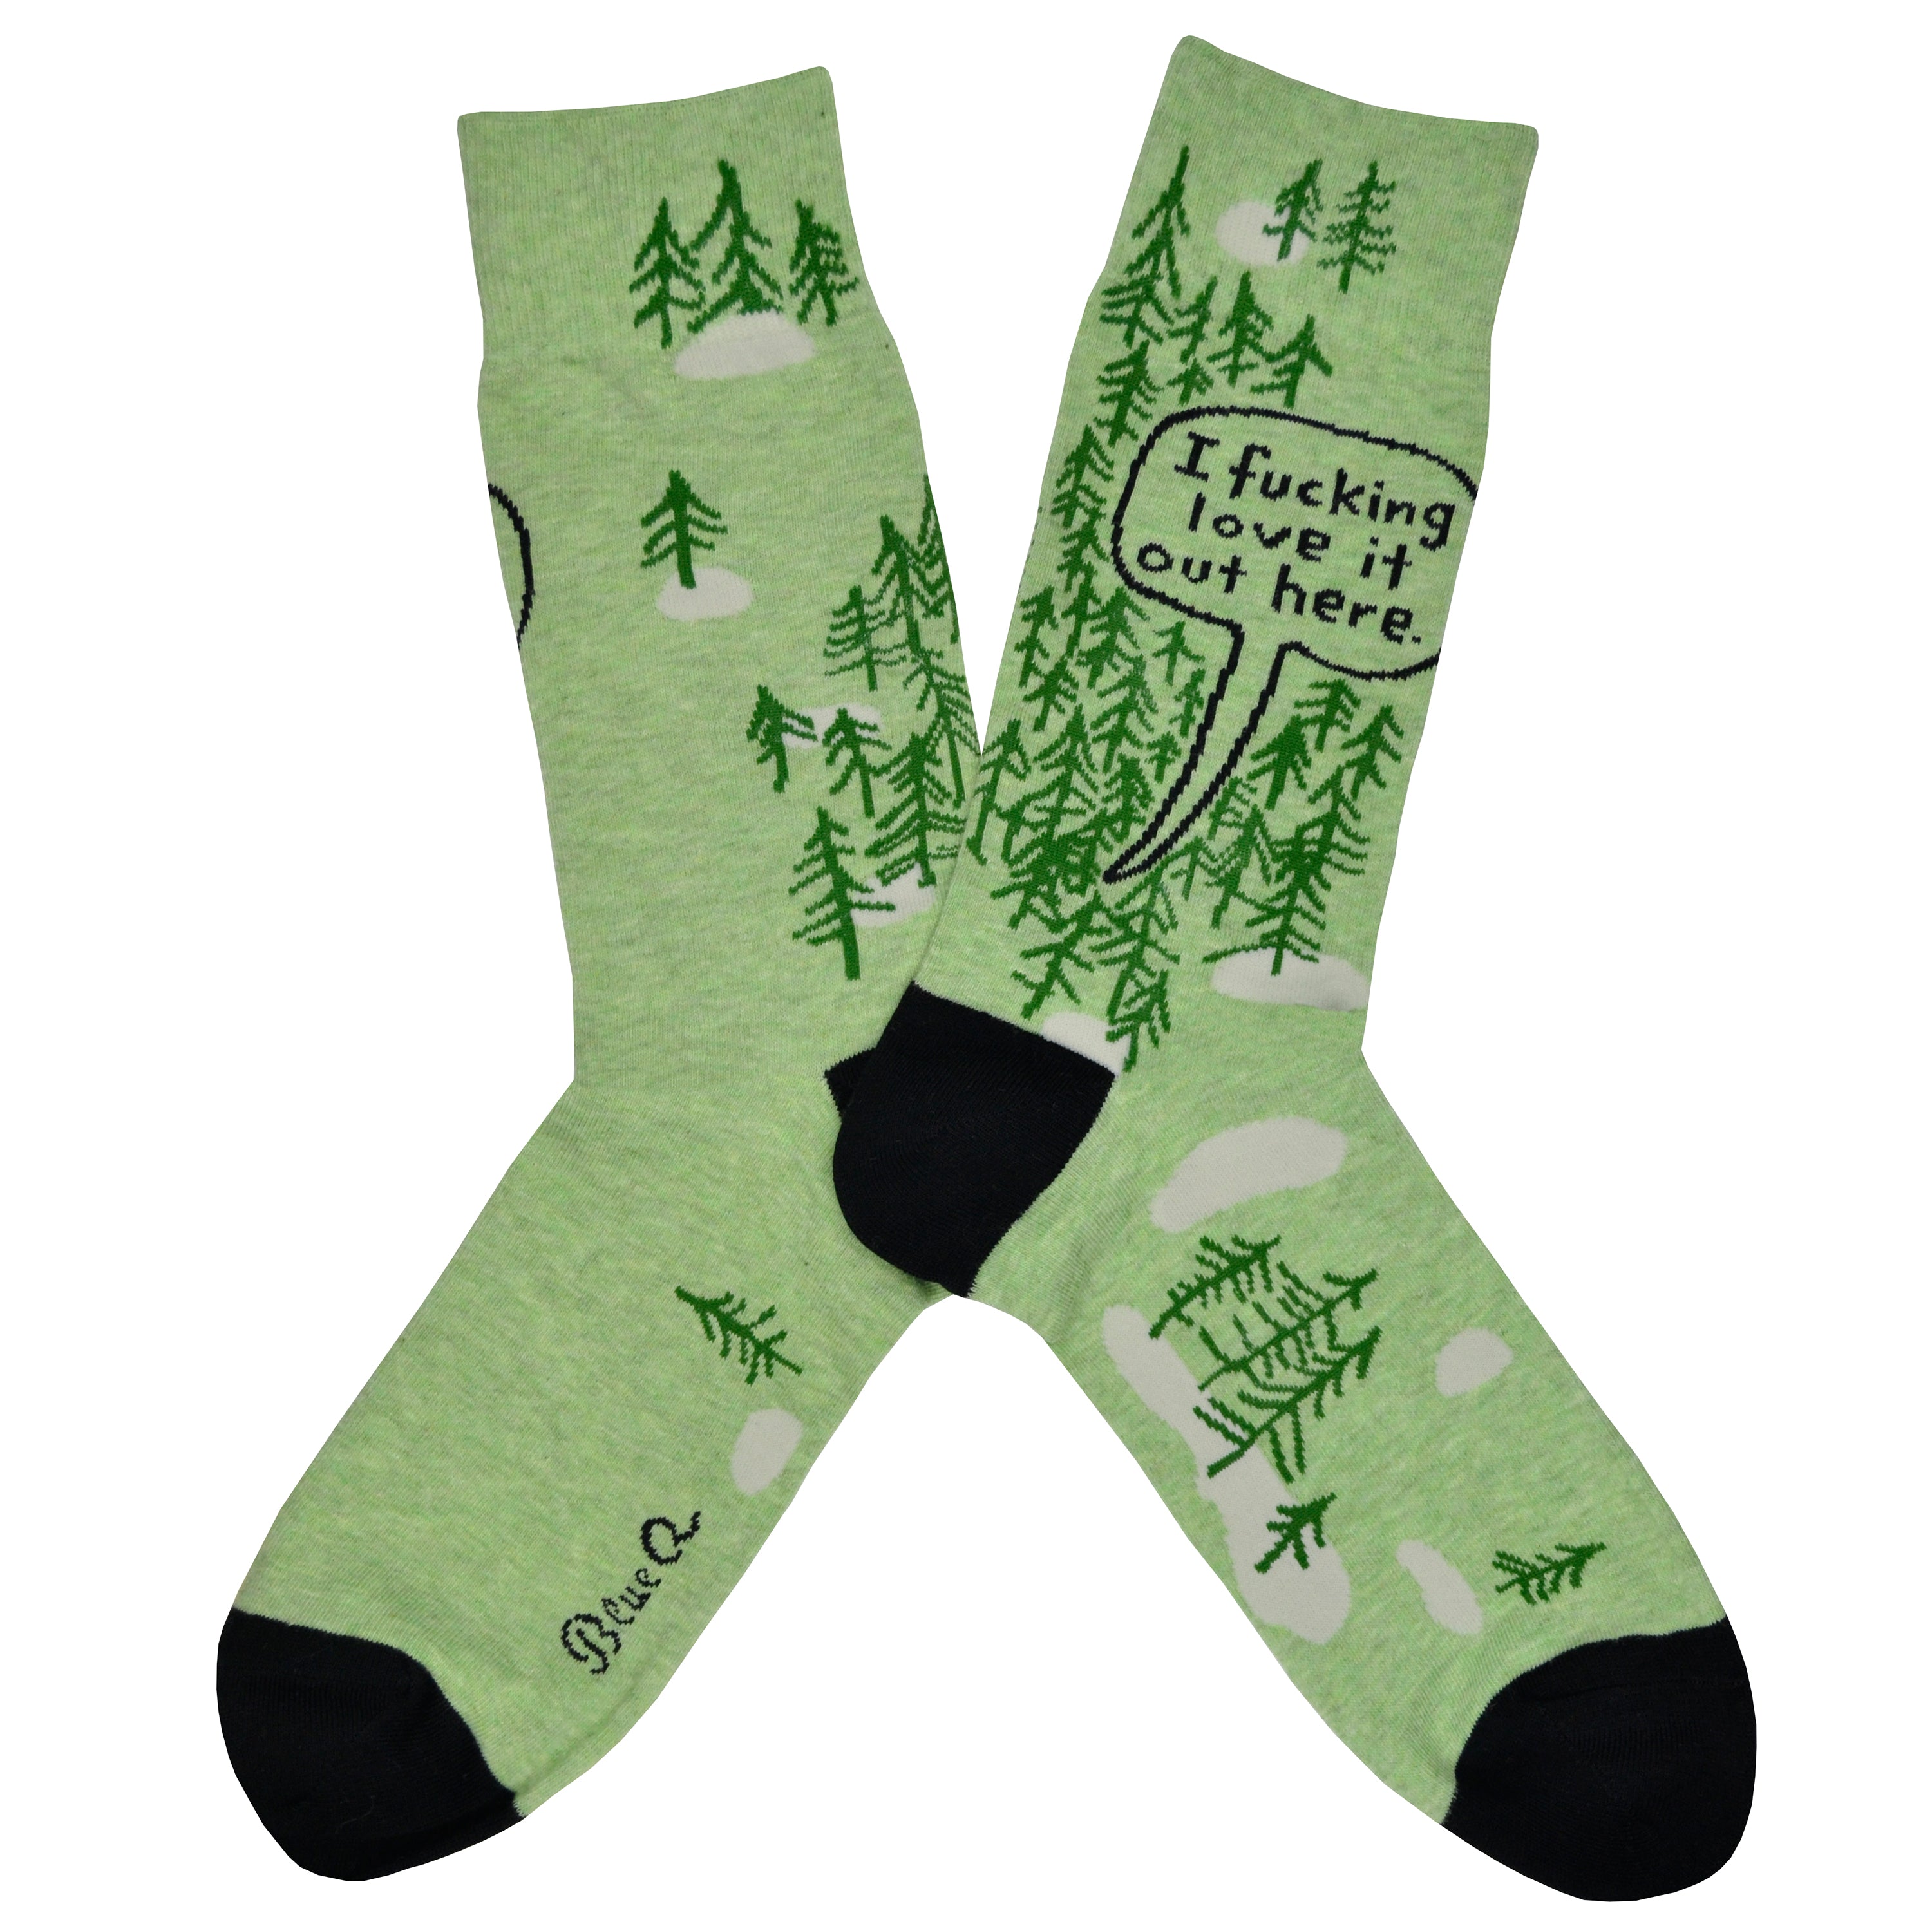 These green cotton men's crew socks with a black heel and toe by the brand Blue Q feature simplistic trees with a large quote bubble proclaiming 